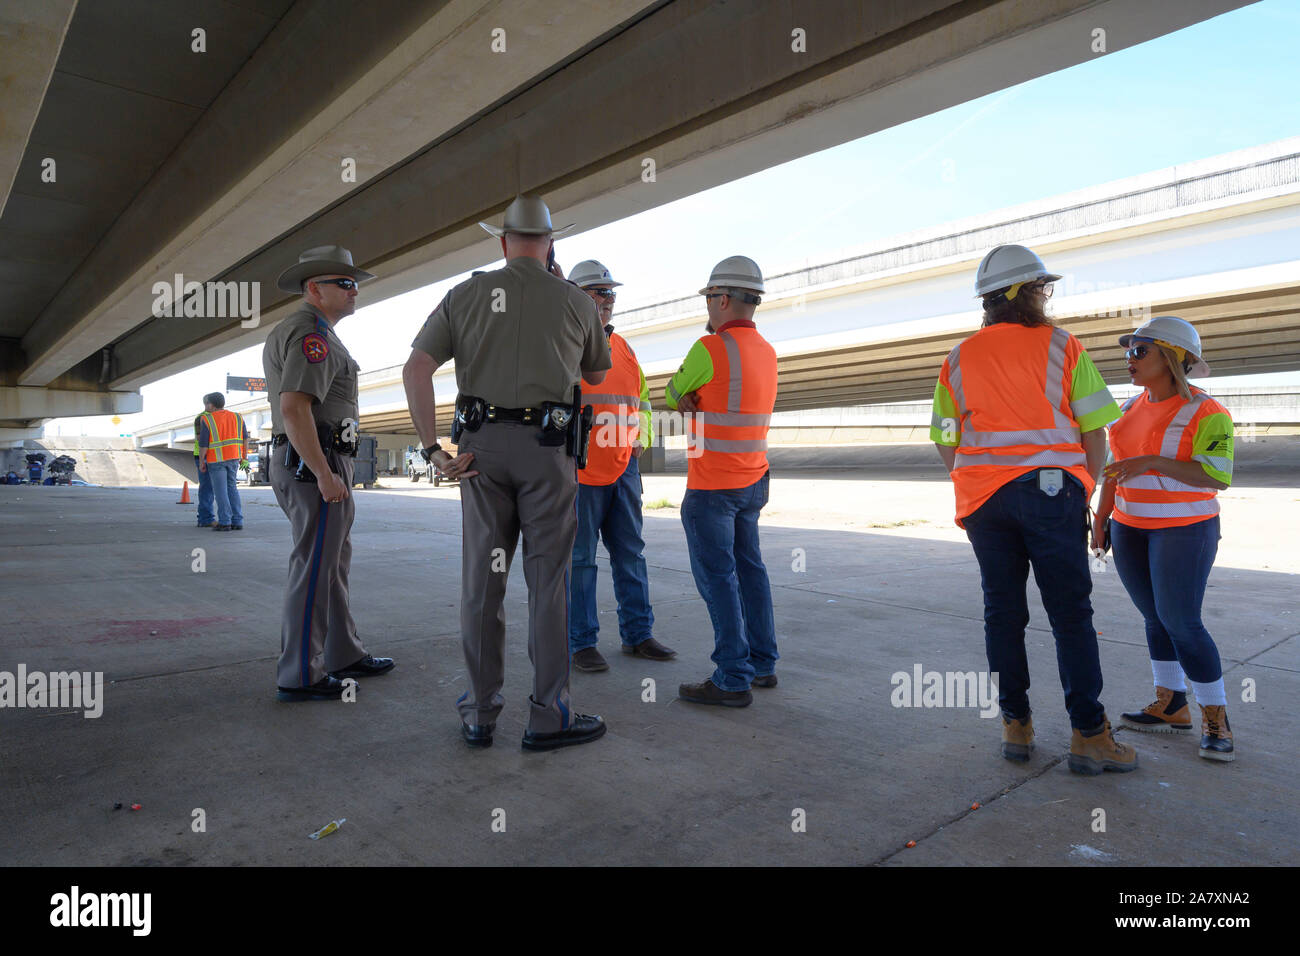 Texas state trooper oversee highway department workers hired to clean up a homeless camp in the public right-of-way under a highway overpass in Austin, Texas. Texas Gov. Greg Abbott ordered the removal of the encampments at 17 sites around the city. Stock Photo